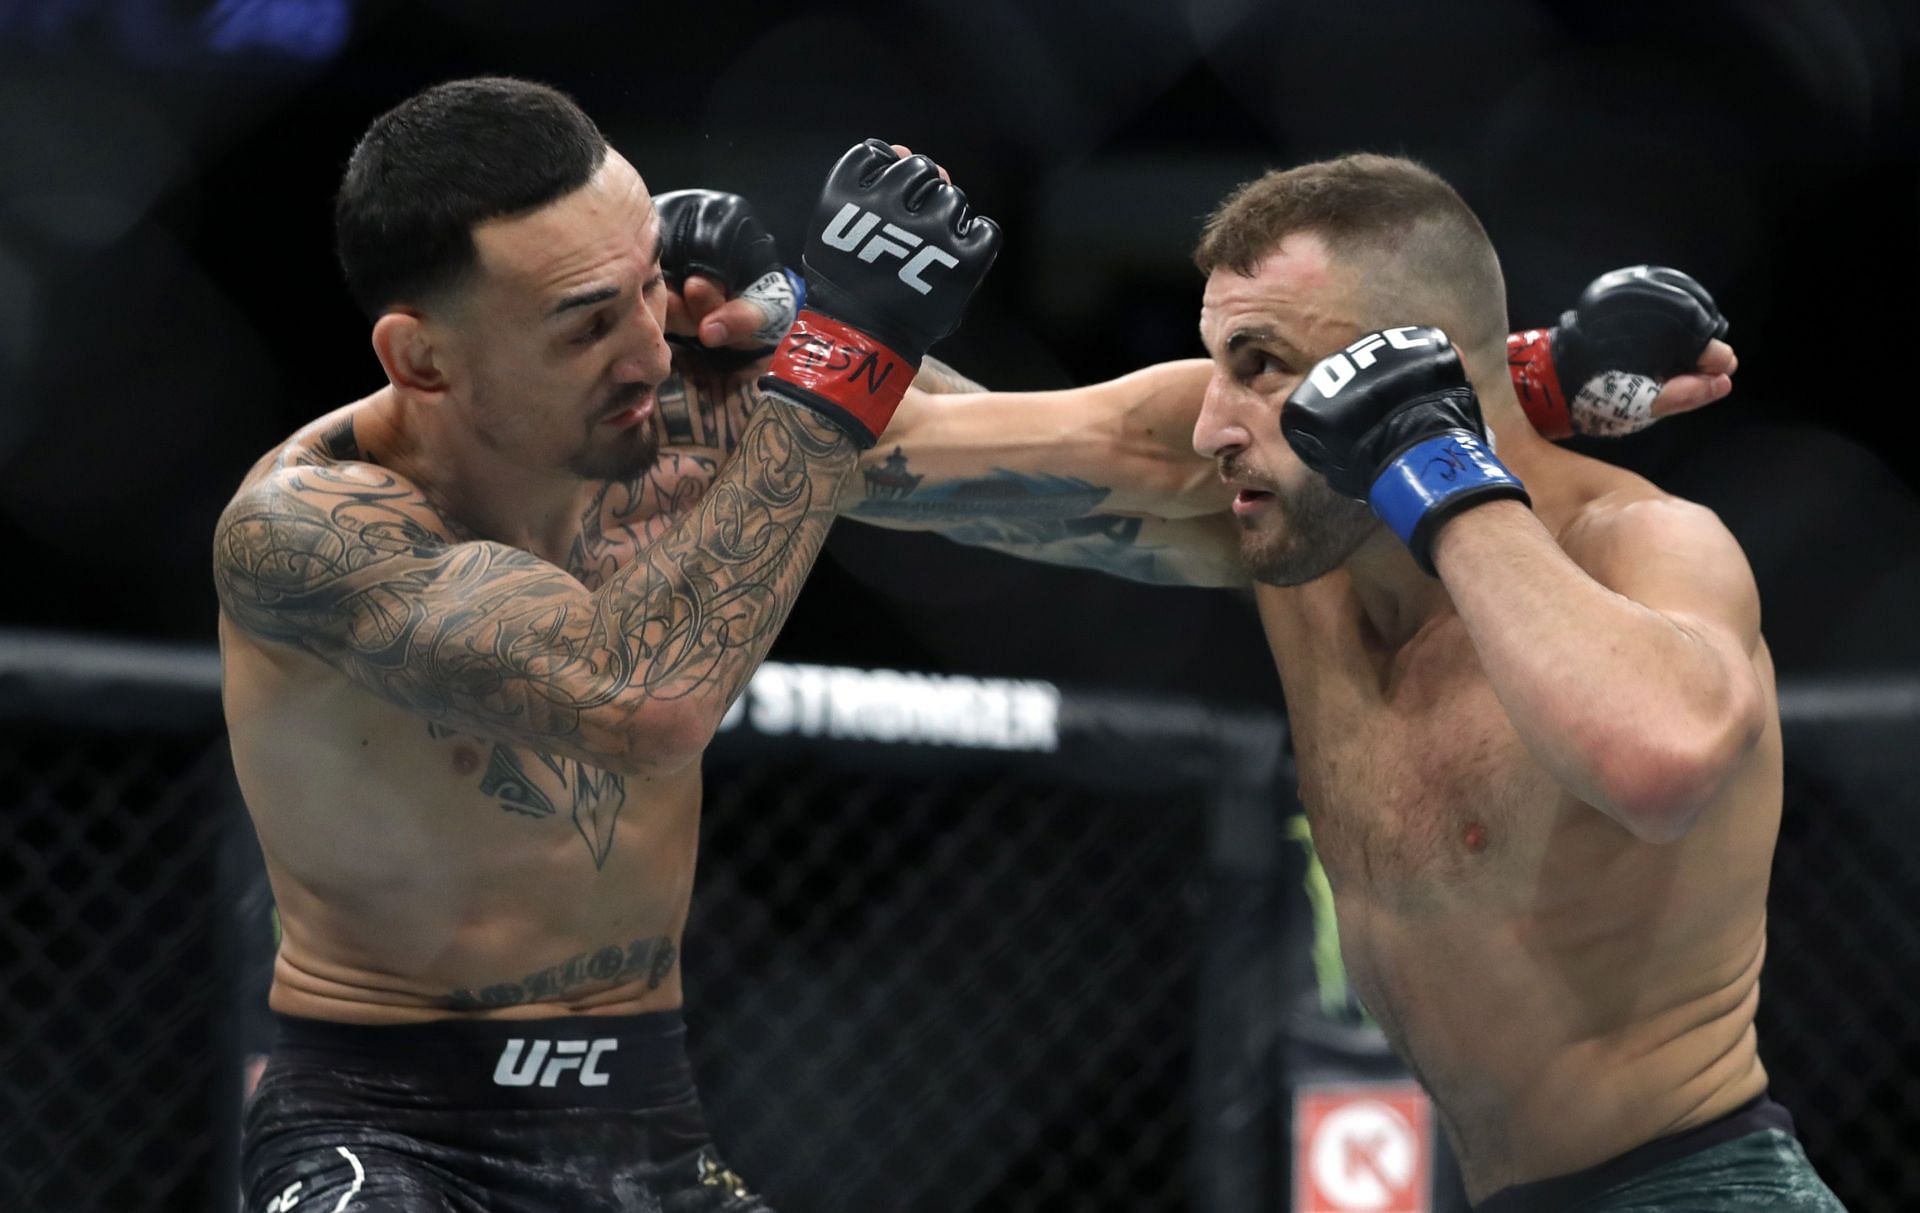 Volkanovski leads the series with Holloway 2-0